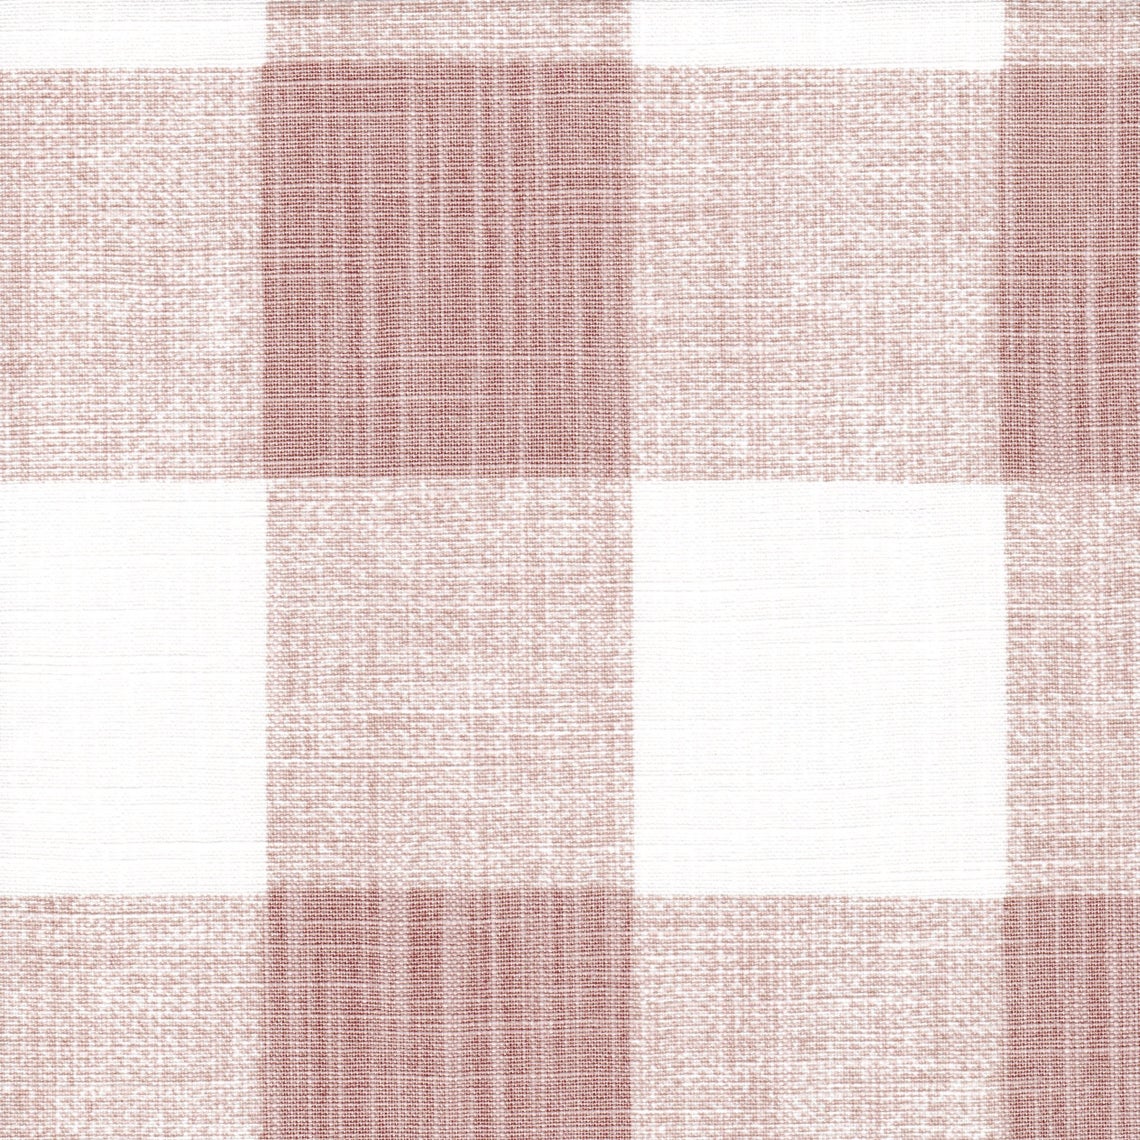 tailored valance in anderson blush buffalo check plaid